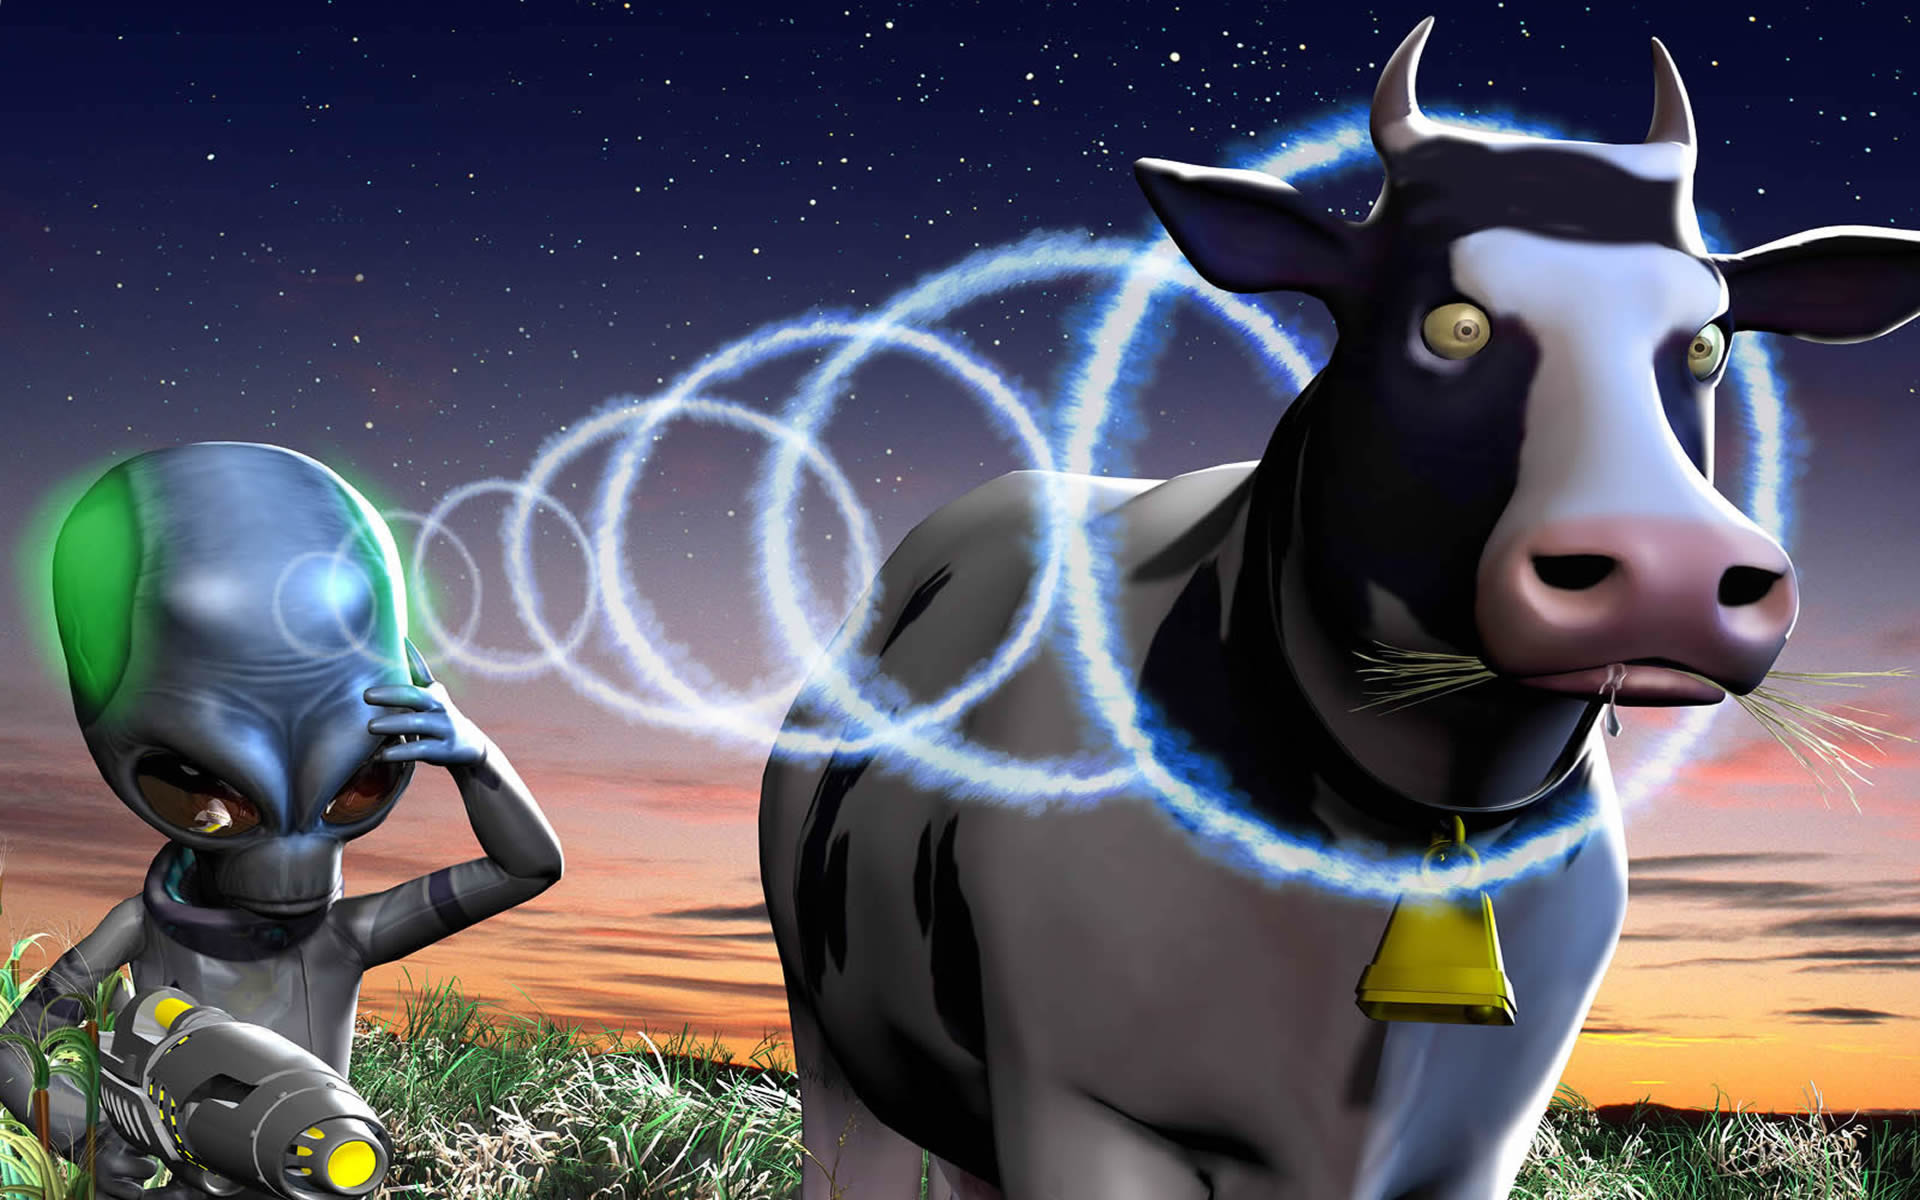 Crypto Performs Mind Control On Cow - Destroy All Humans Cow - HD Wallpaper 